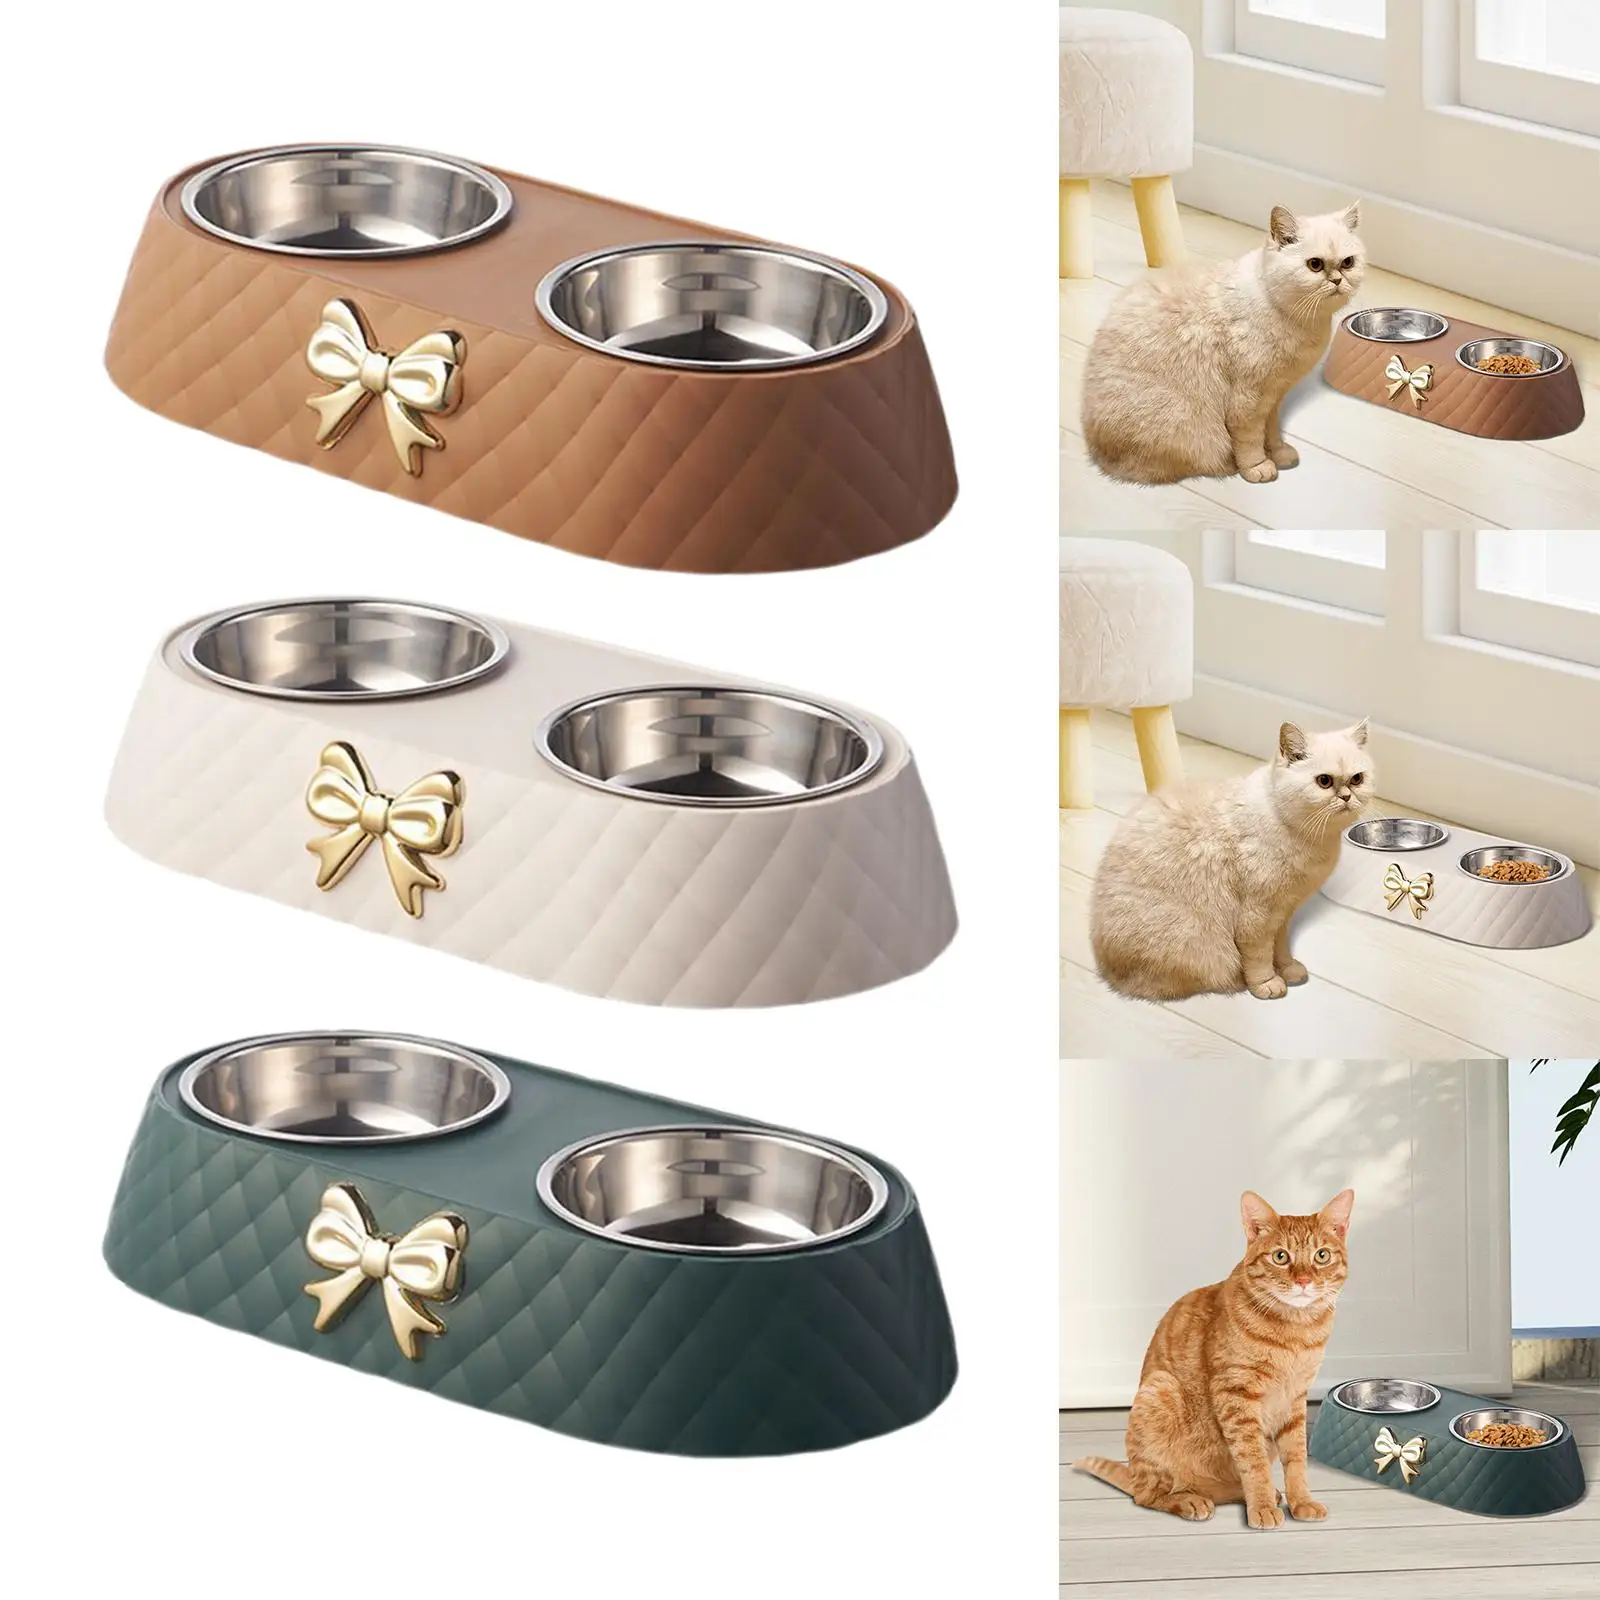 Dog Cat Double Bowls Stainless Steel Pet Bowls Feeder Simple to Clean